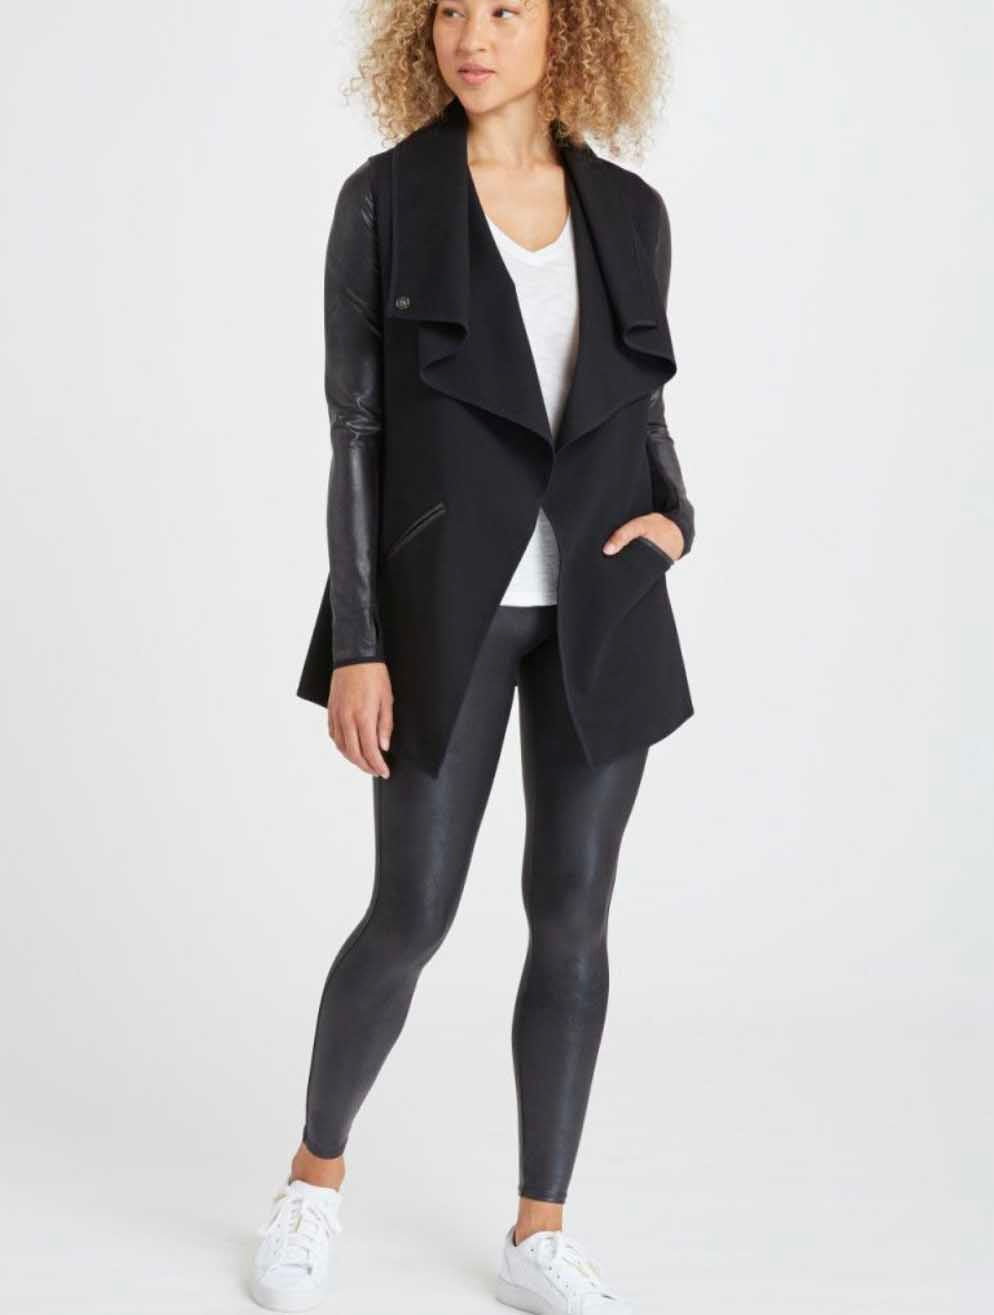 Spanx Drape Front Jacket in Very Black